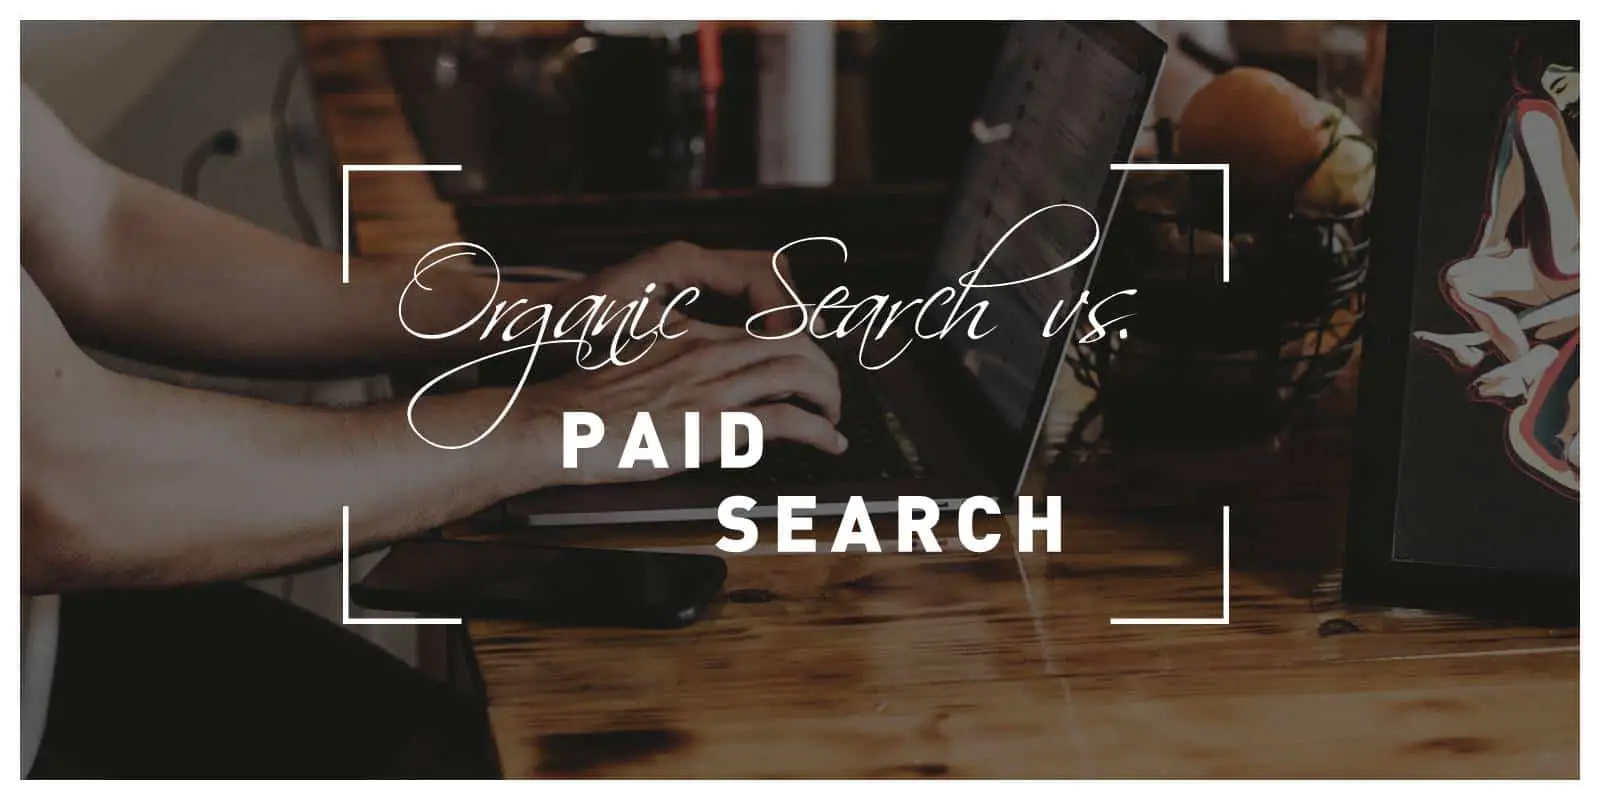 Organic Search vs. Paid Search - Which is Better